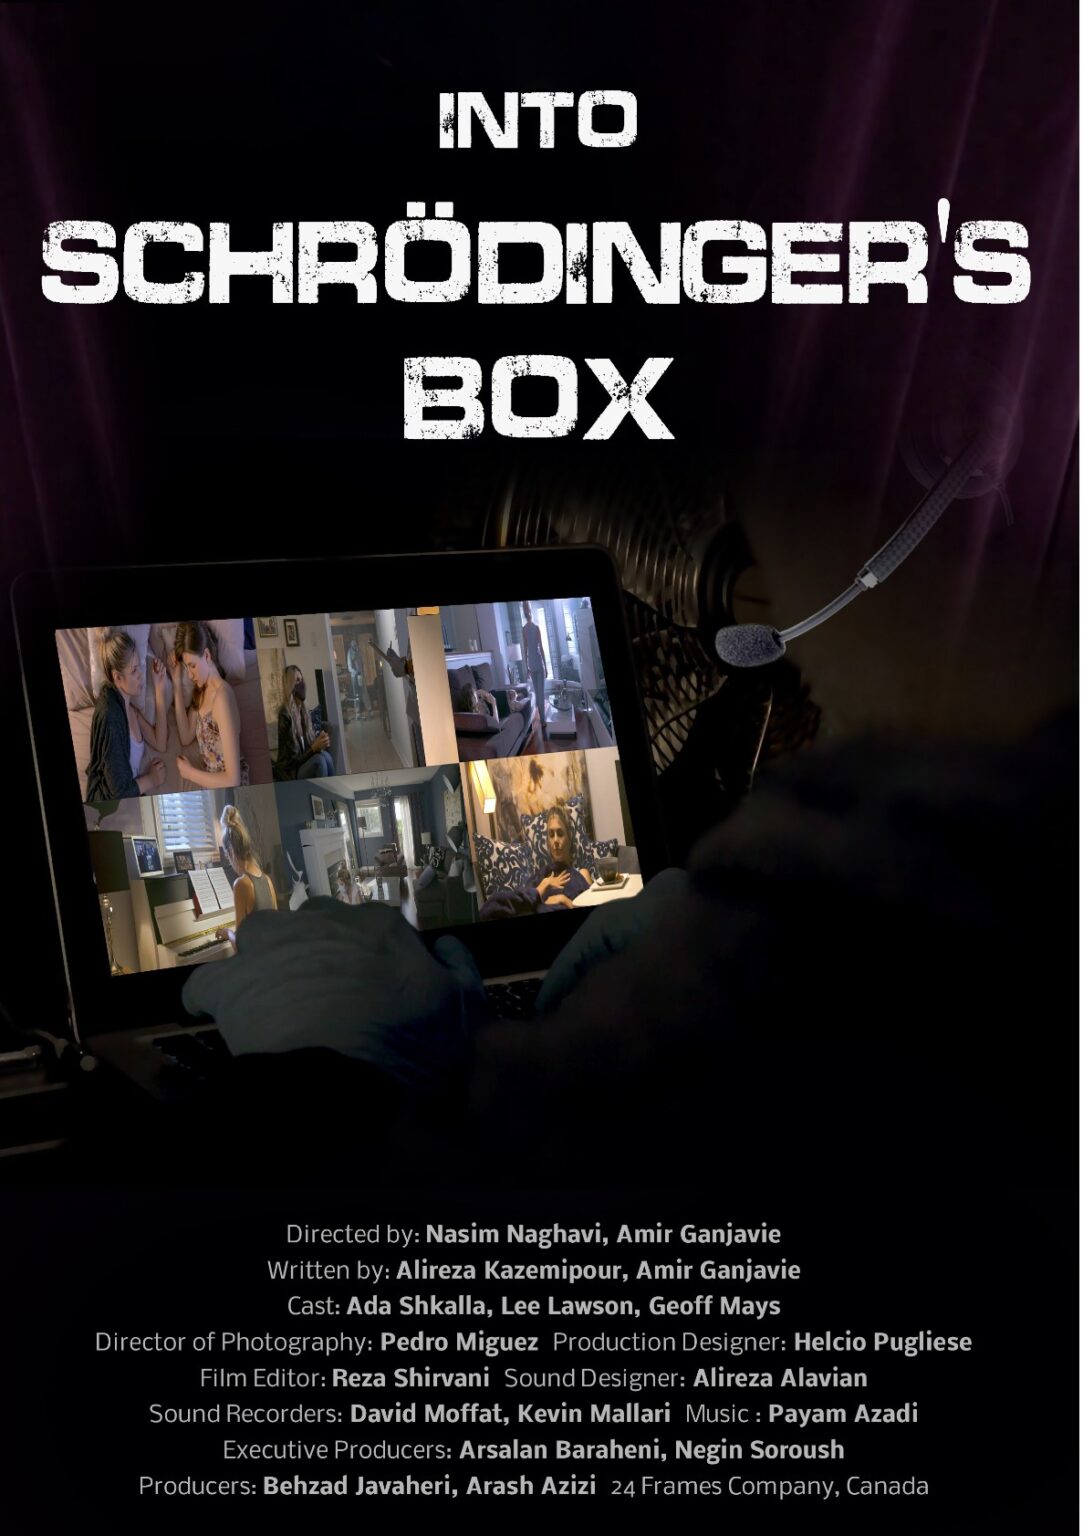 Alireza Kazemipour wrote the script for the new thriller 'Into Schrödinger’s Box'. Learn more about the film and Kazemipour's career here.